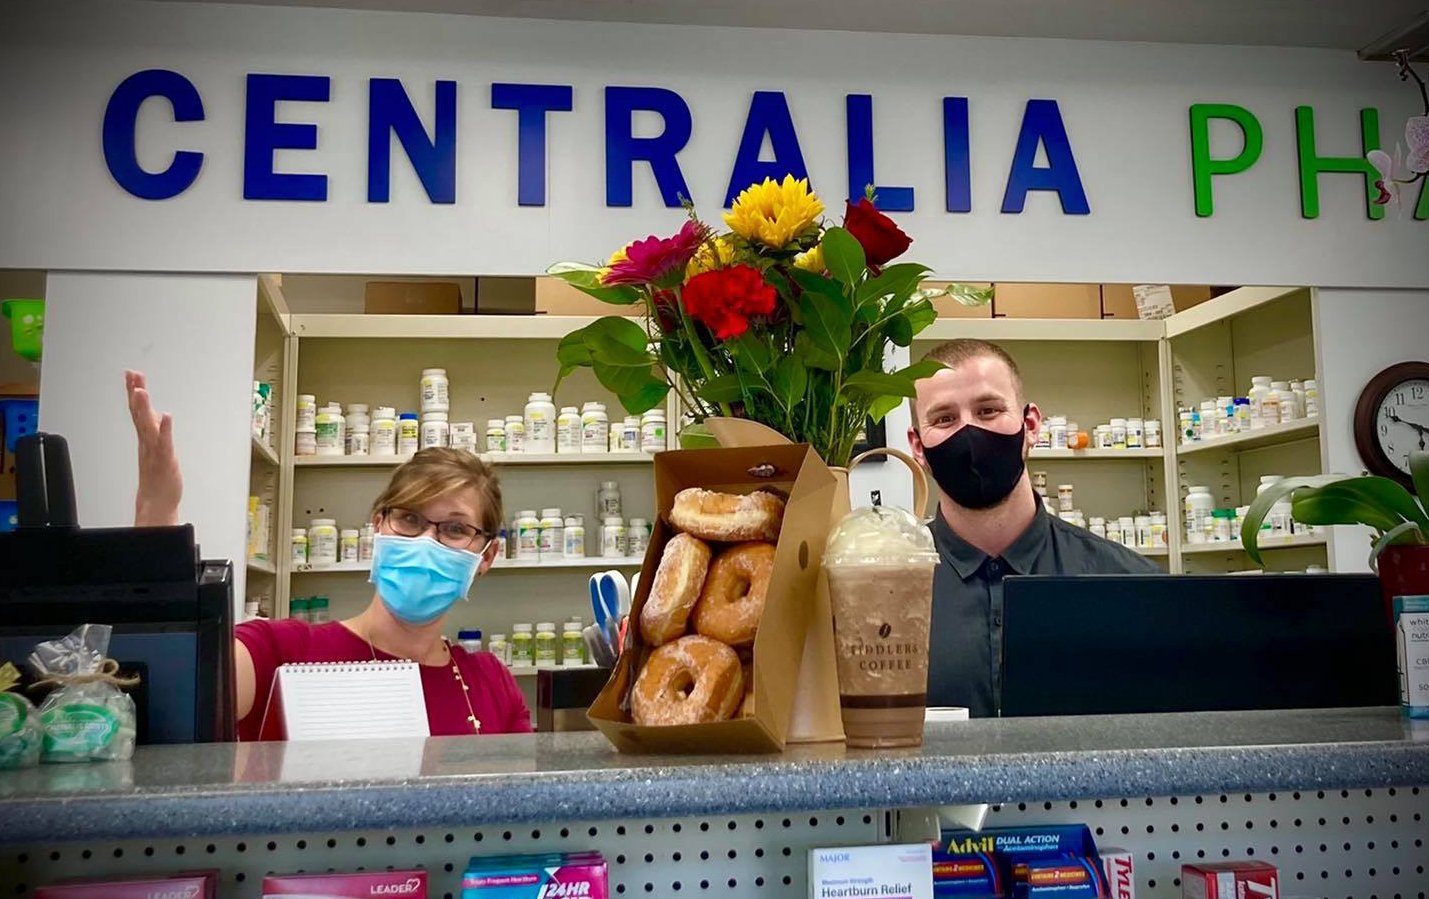 The Quimbys started Centralia Pharmacy in May 2017 with their business partner, Jeff Harrell, reinvigorating one of Centralia’s oldest pharmacy locations.